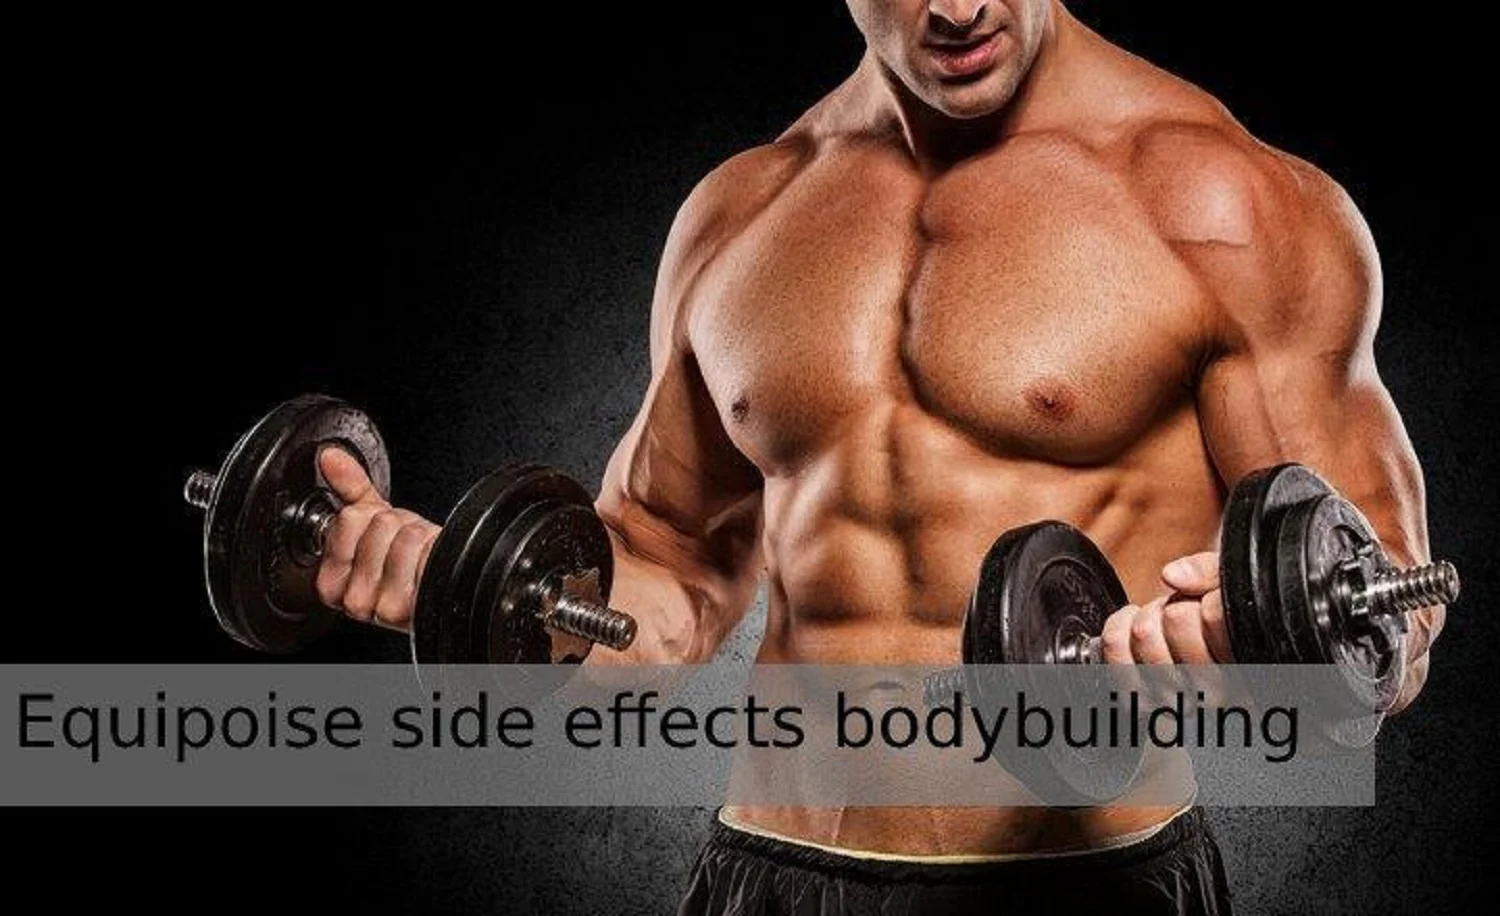 Equipoise side effects in bodybuilding